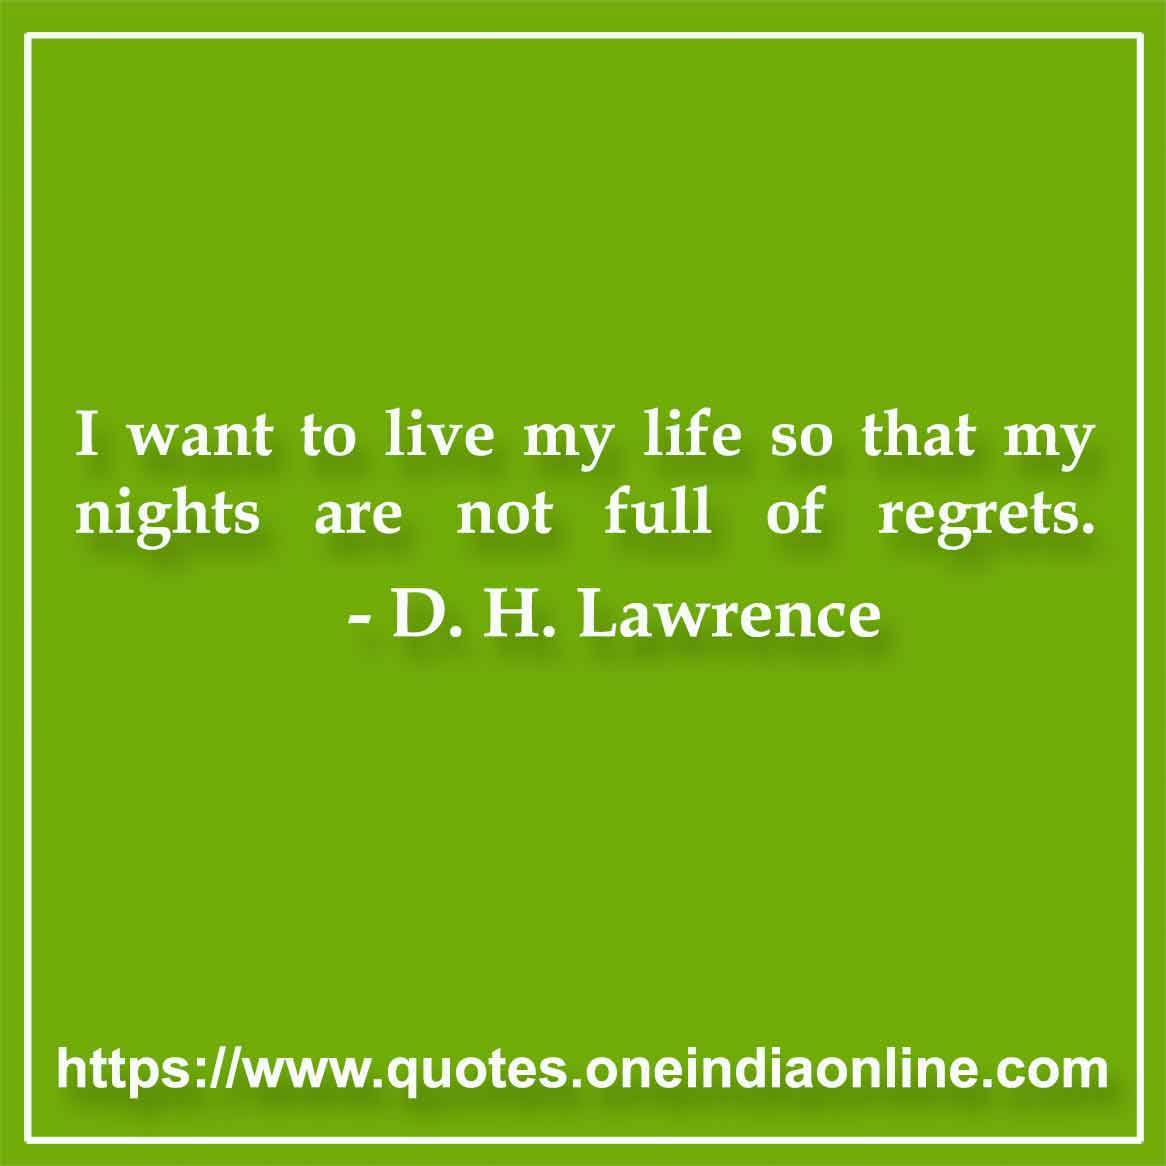 I want to live my life so that my nights are not full of regrets.

-  D. H. Lawrence